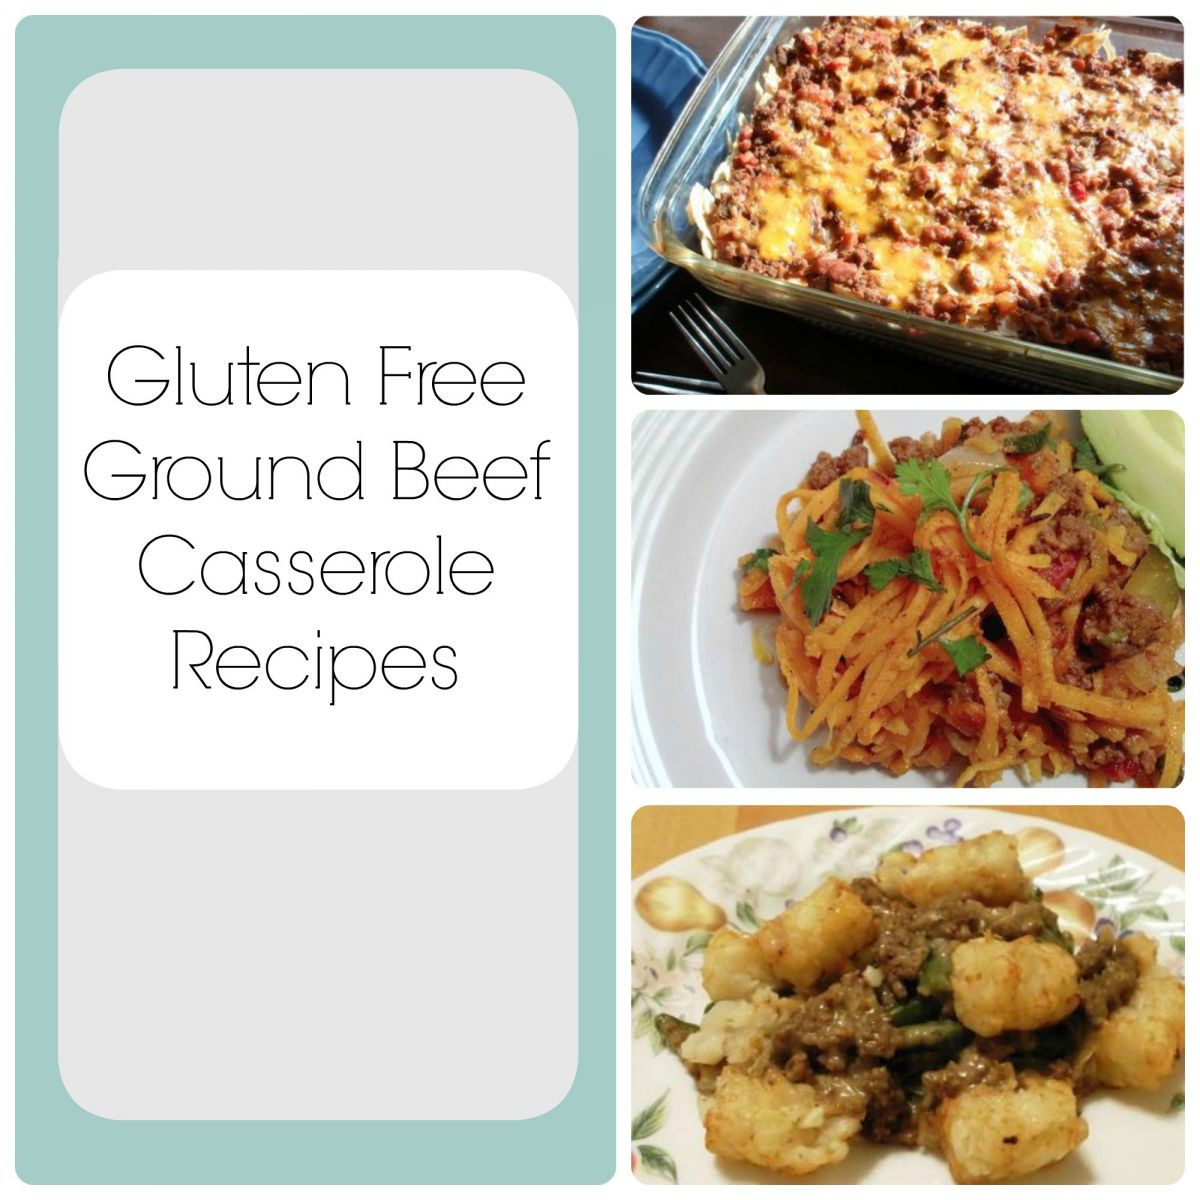 Gluten Free Dairy Free Ground Beef Recipes
 ly the Best Gluten Free Recipes 8 Ground Beef Casserole